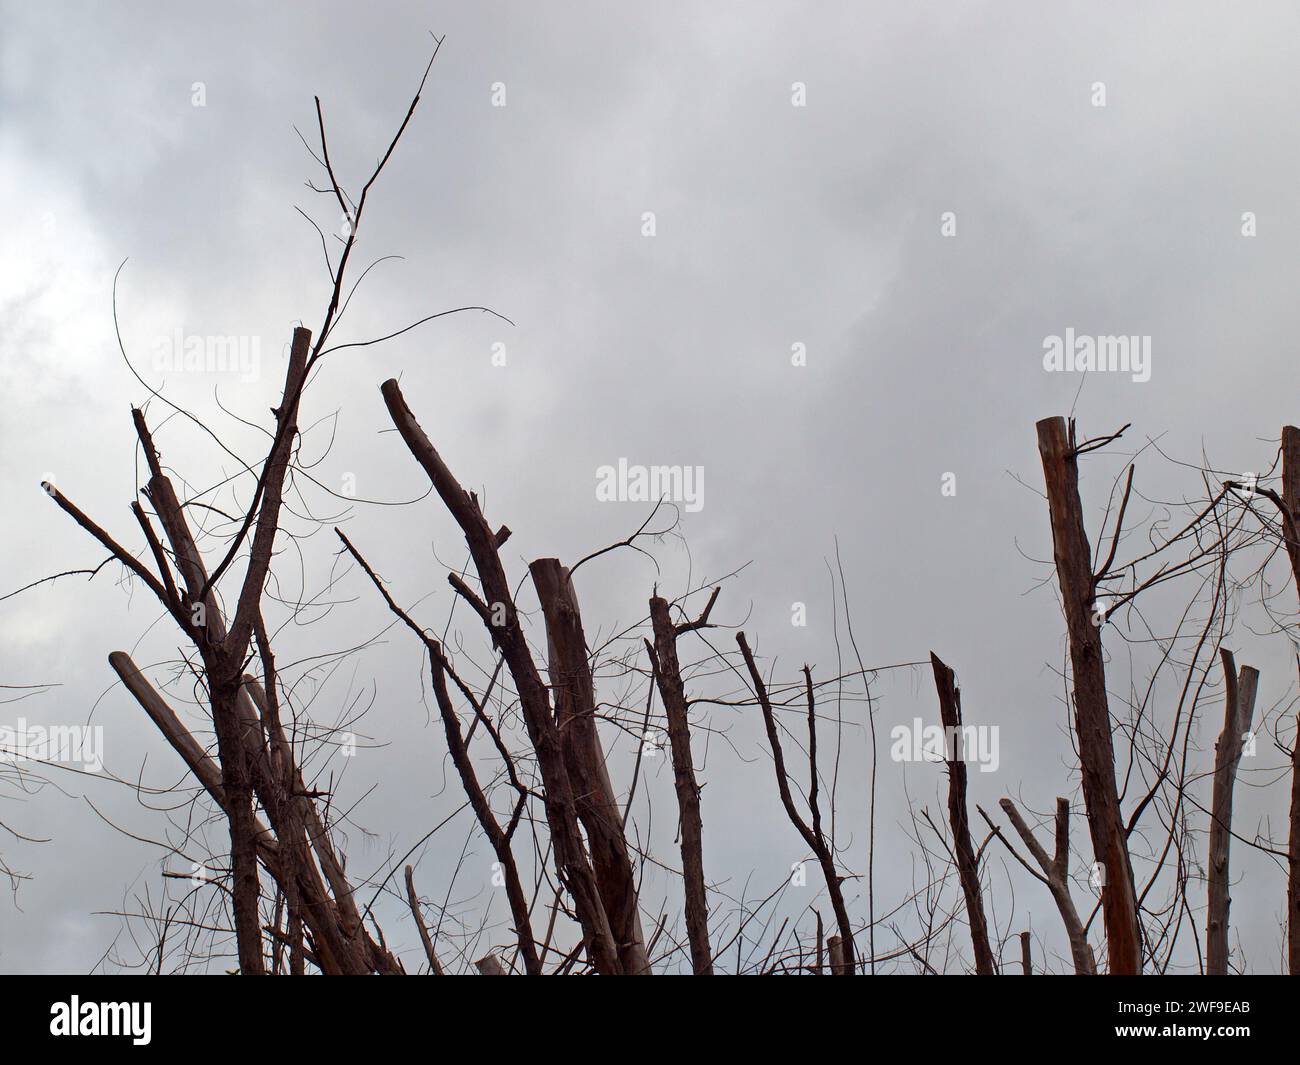 Leafless trees in a cloudy day of winter. Sad mood feeling. Stock Photo